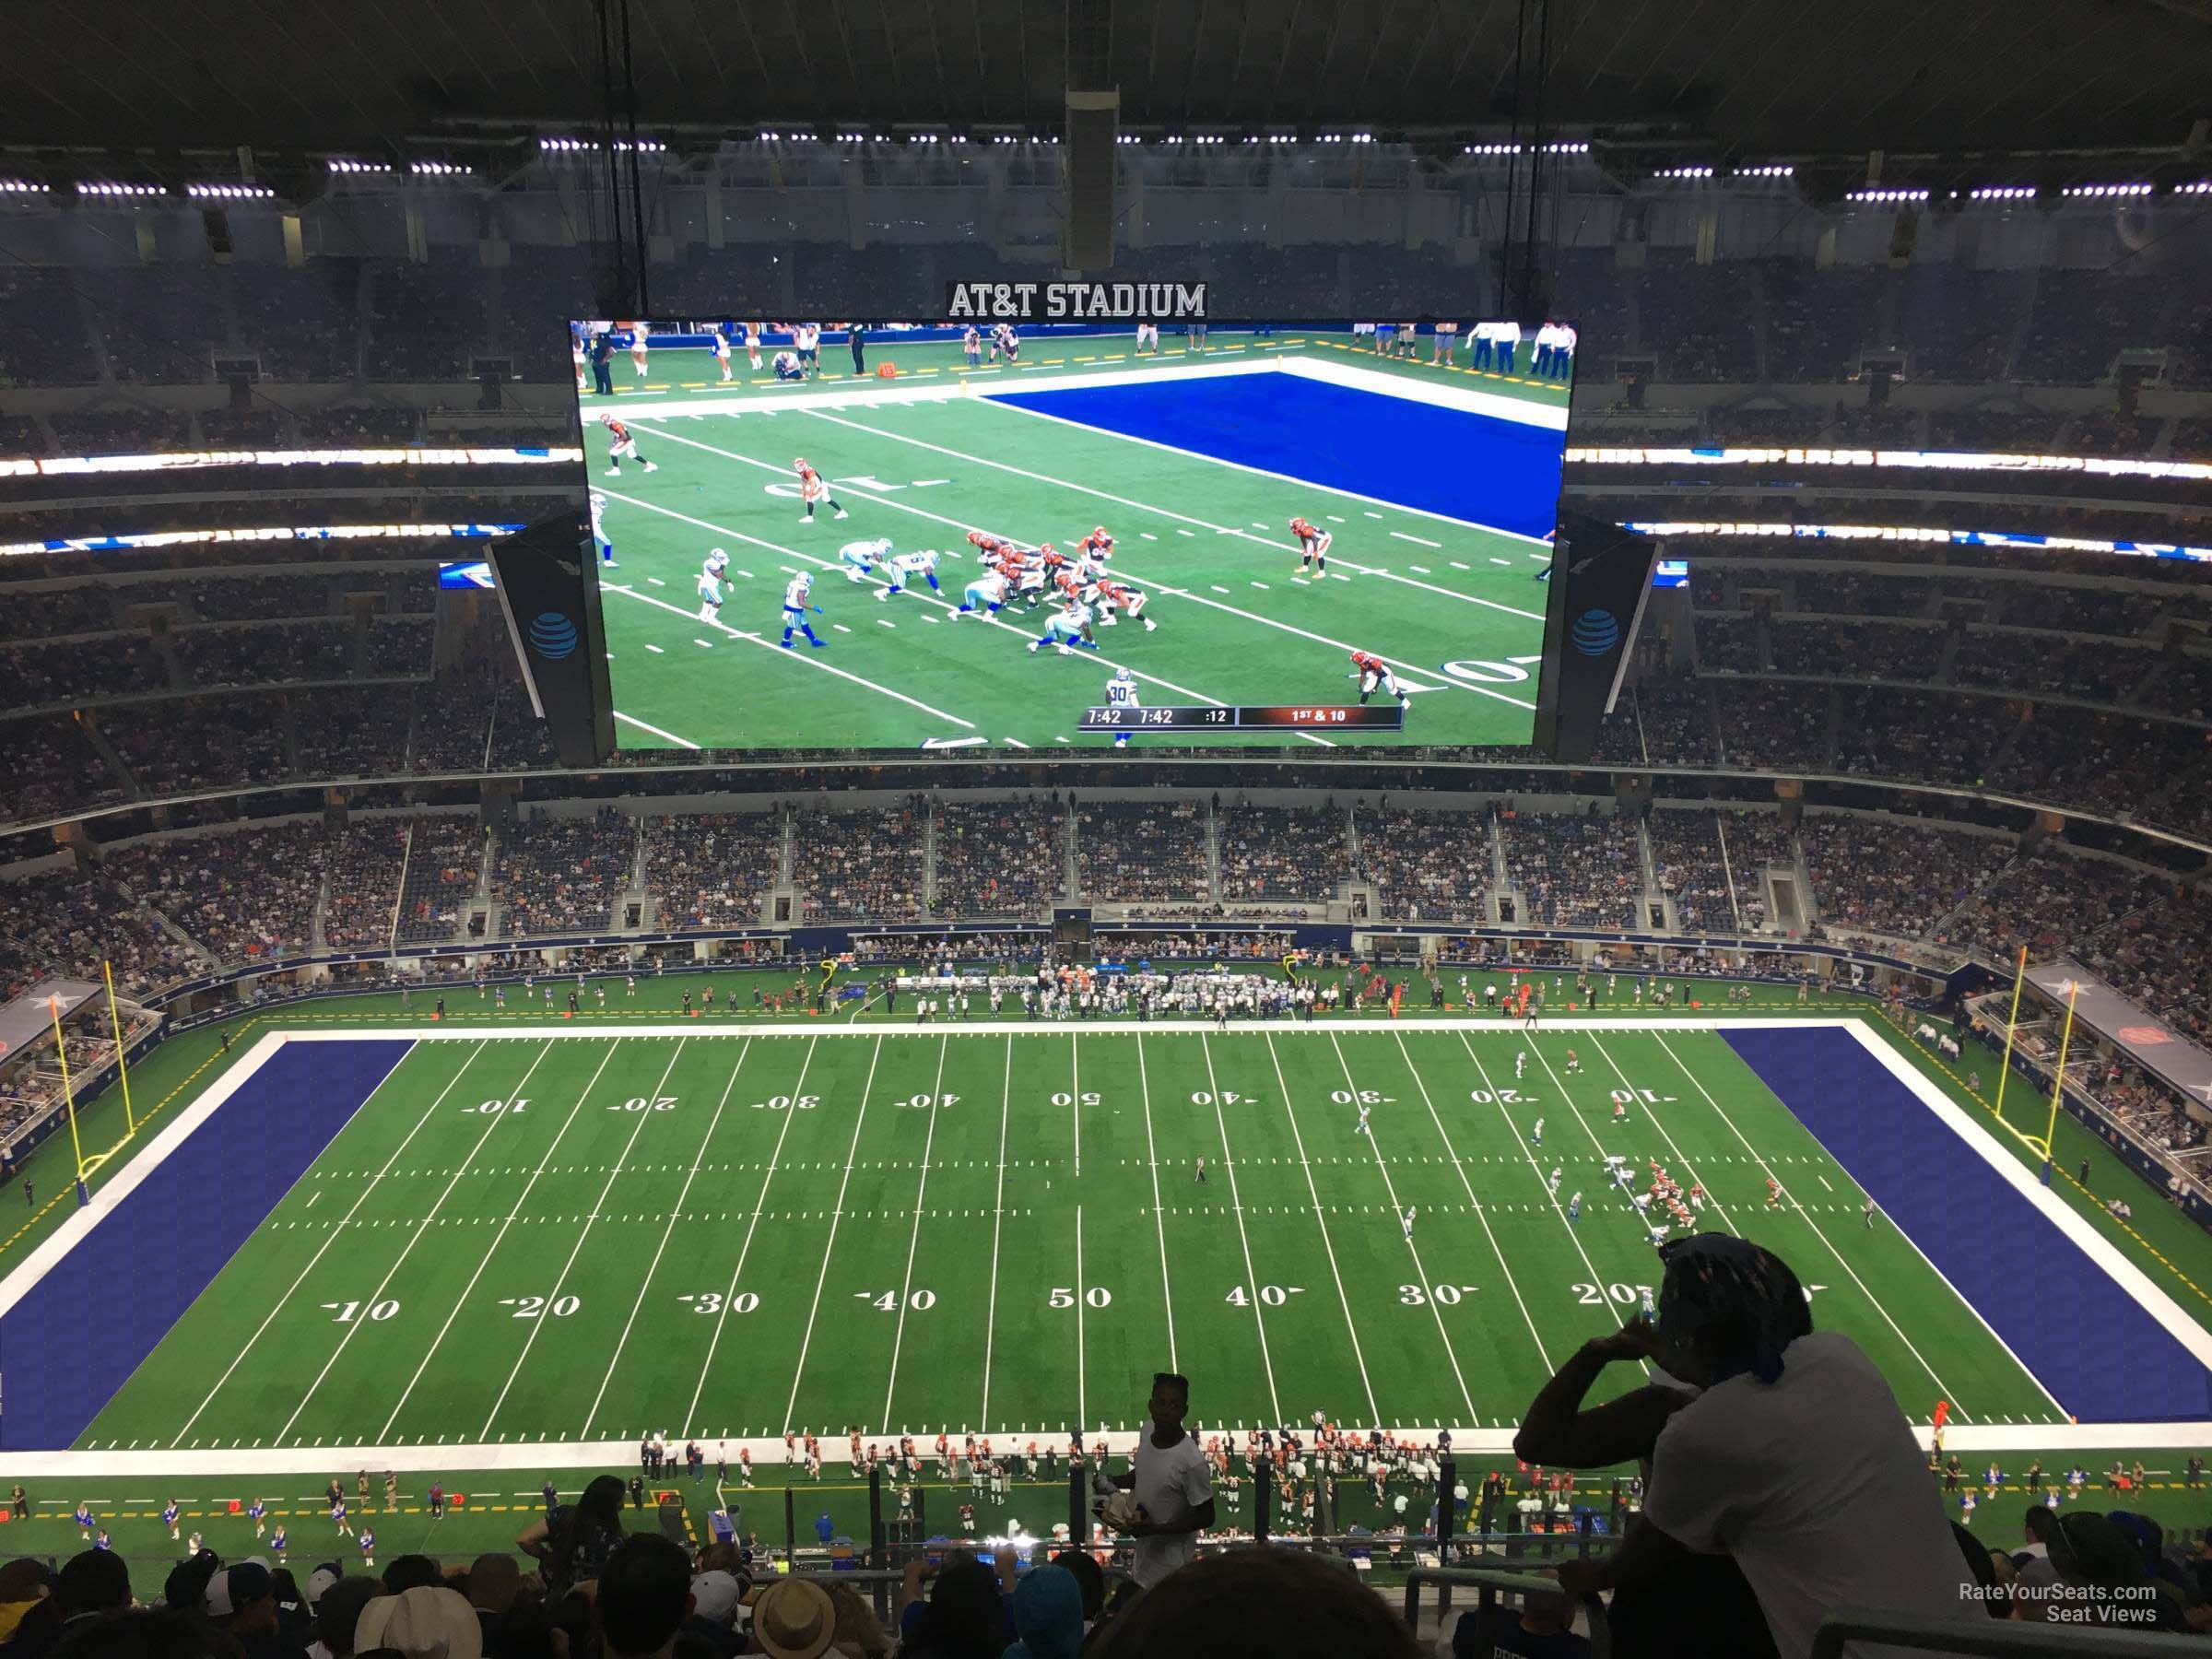 section 444, row 22 seat view  for football - at&t stadium (cowboys stadium)